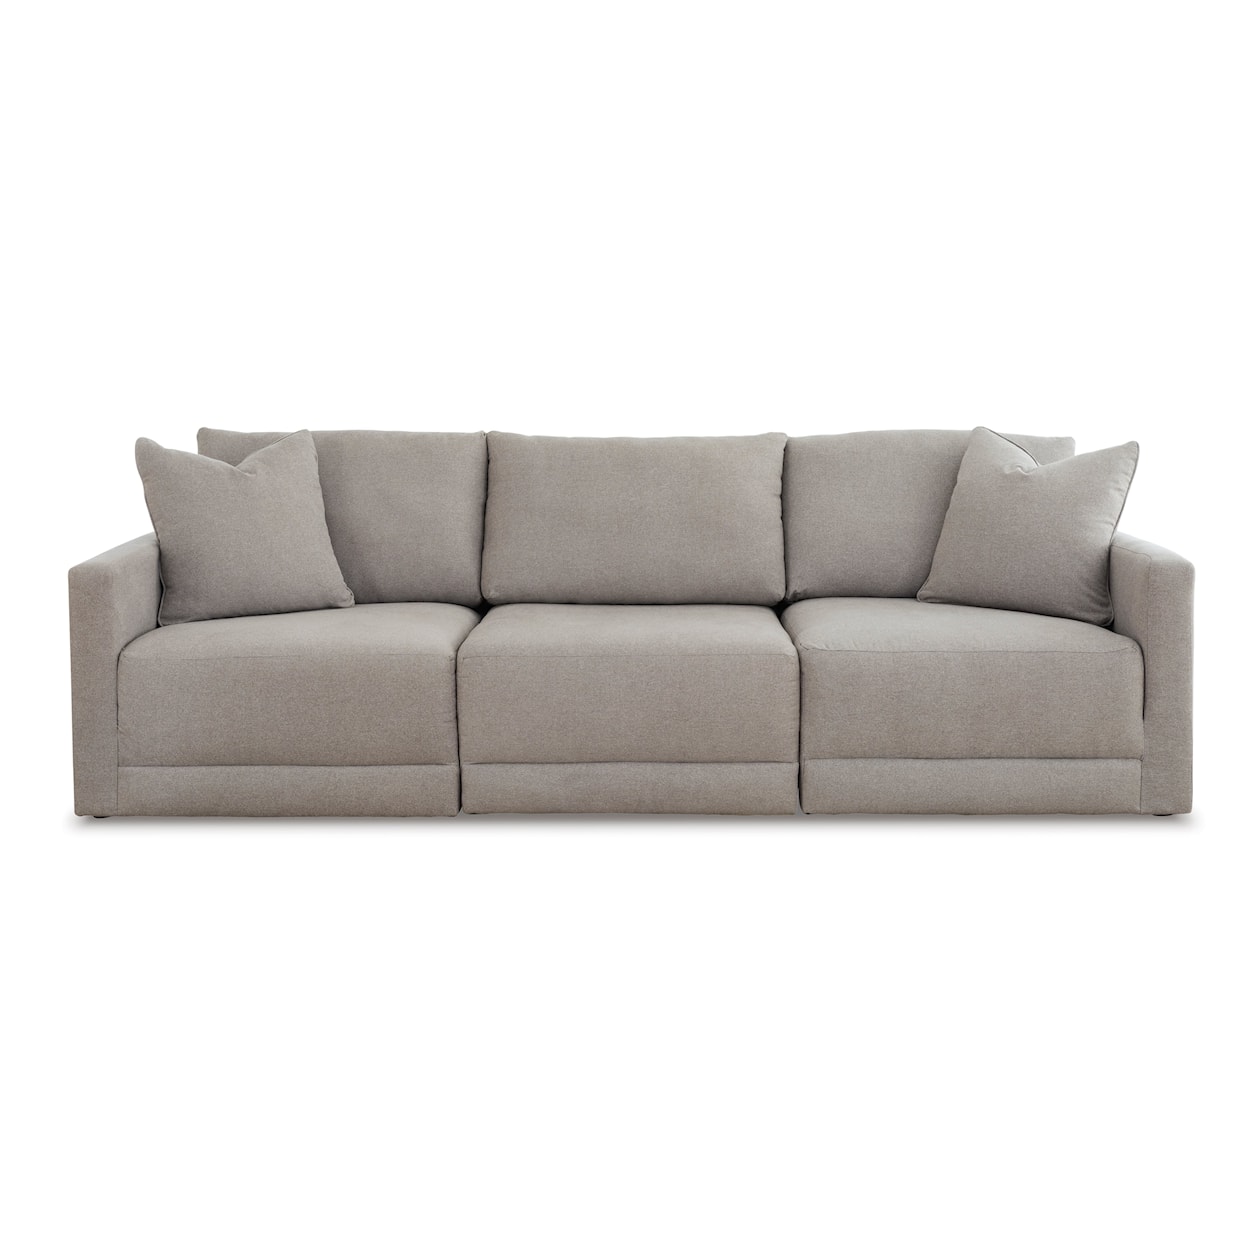 Benchcraft by Ashley Katany 3-Piece Sectional Sofa